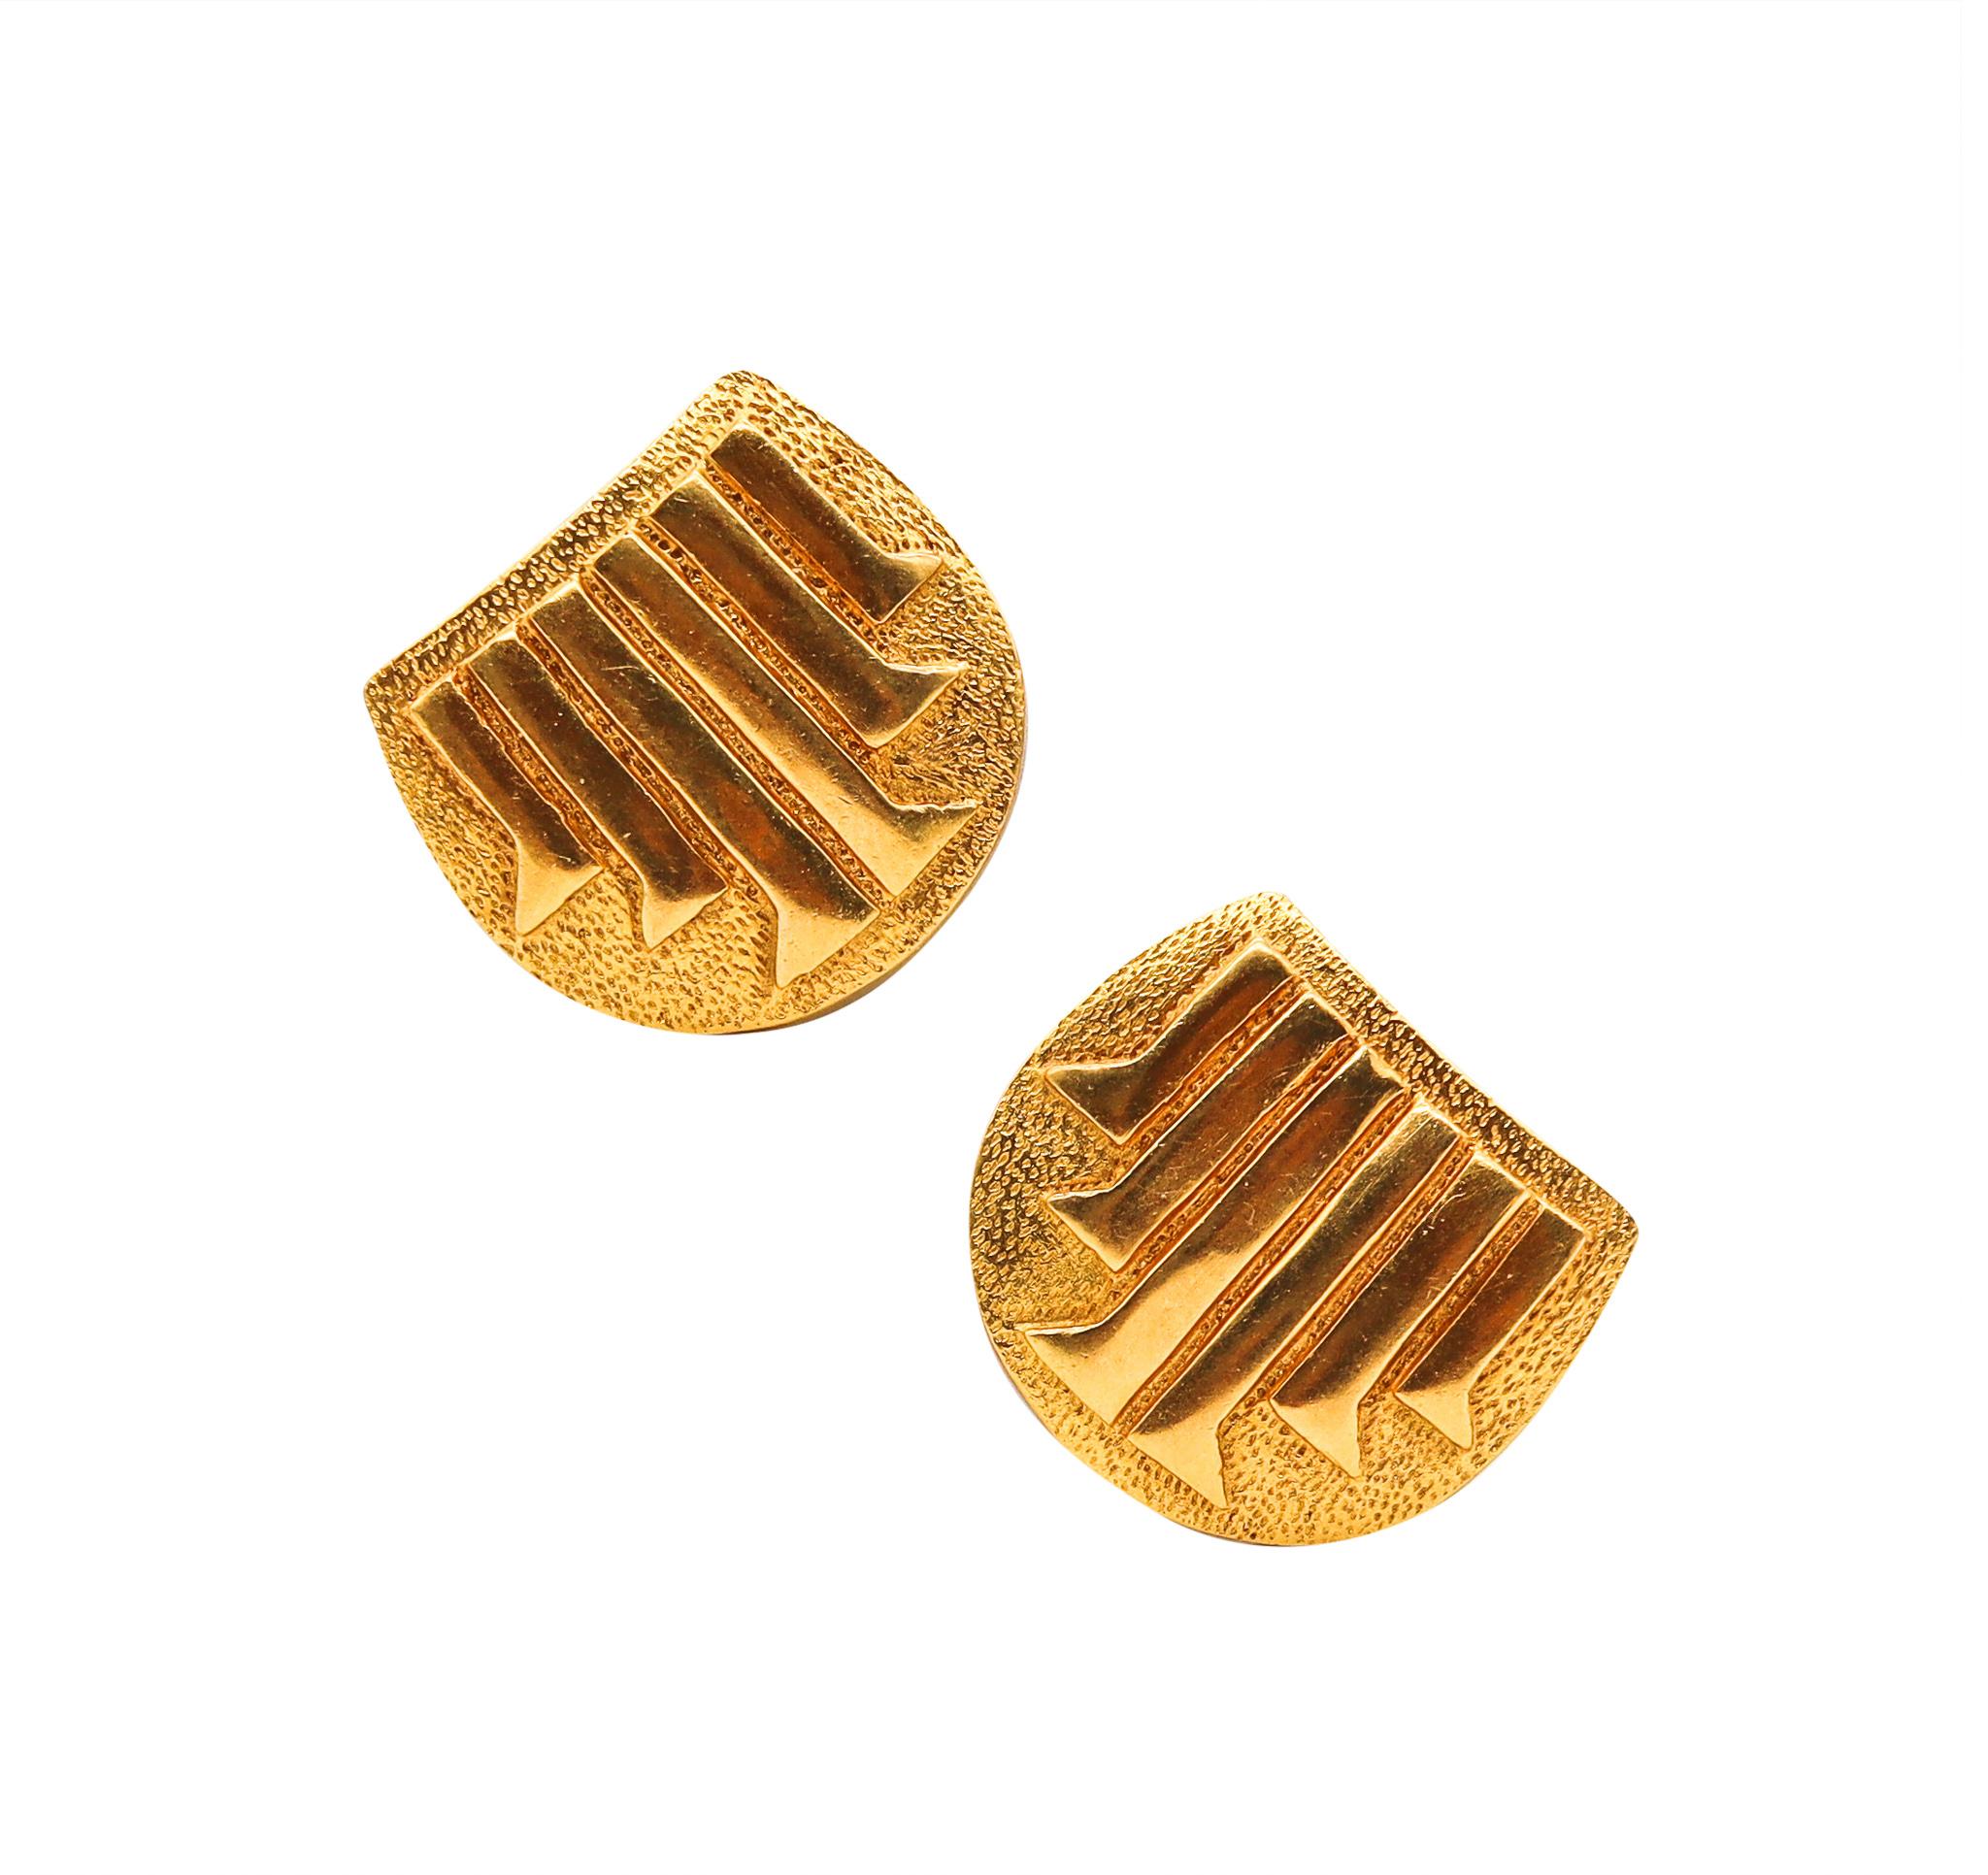 Women's Lalaounis 1970 Modernisme Geometric Earrings in Solid Textured 18kt Yellow Gold For Sale